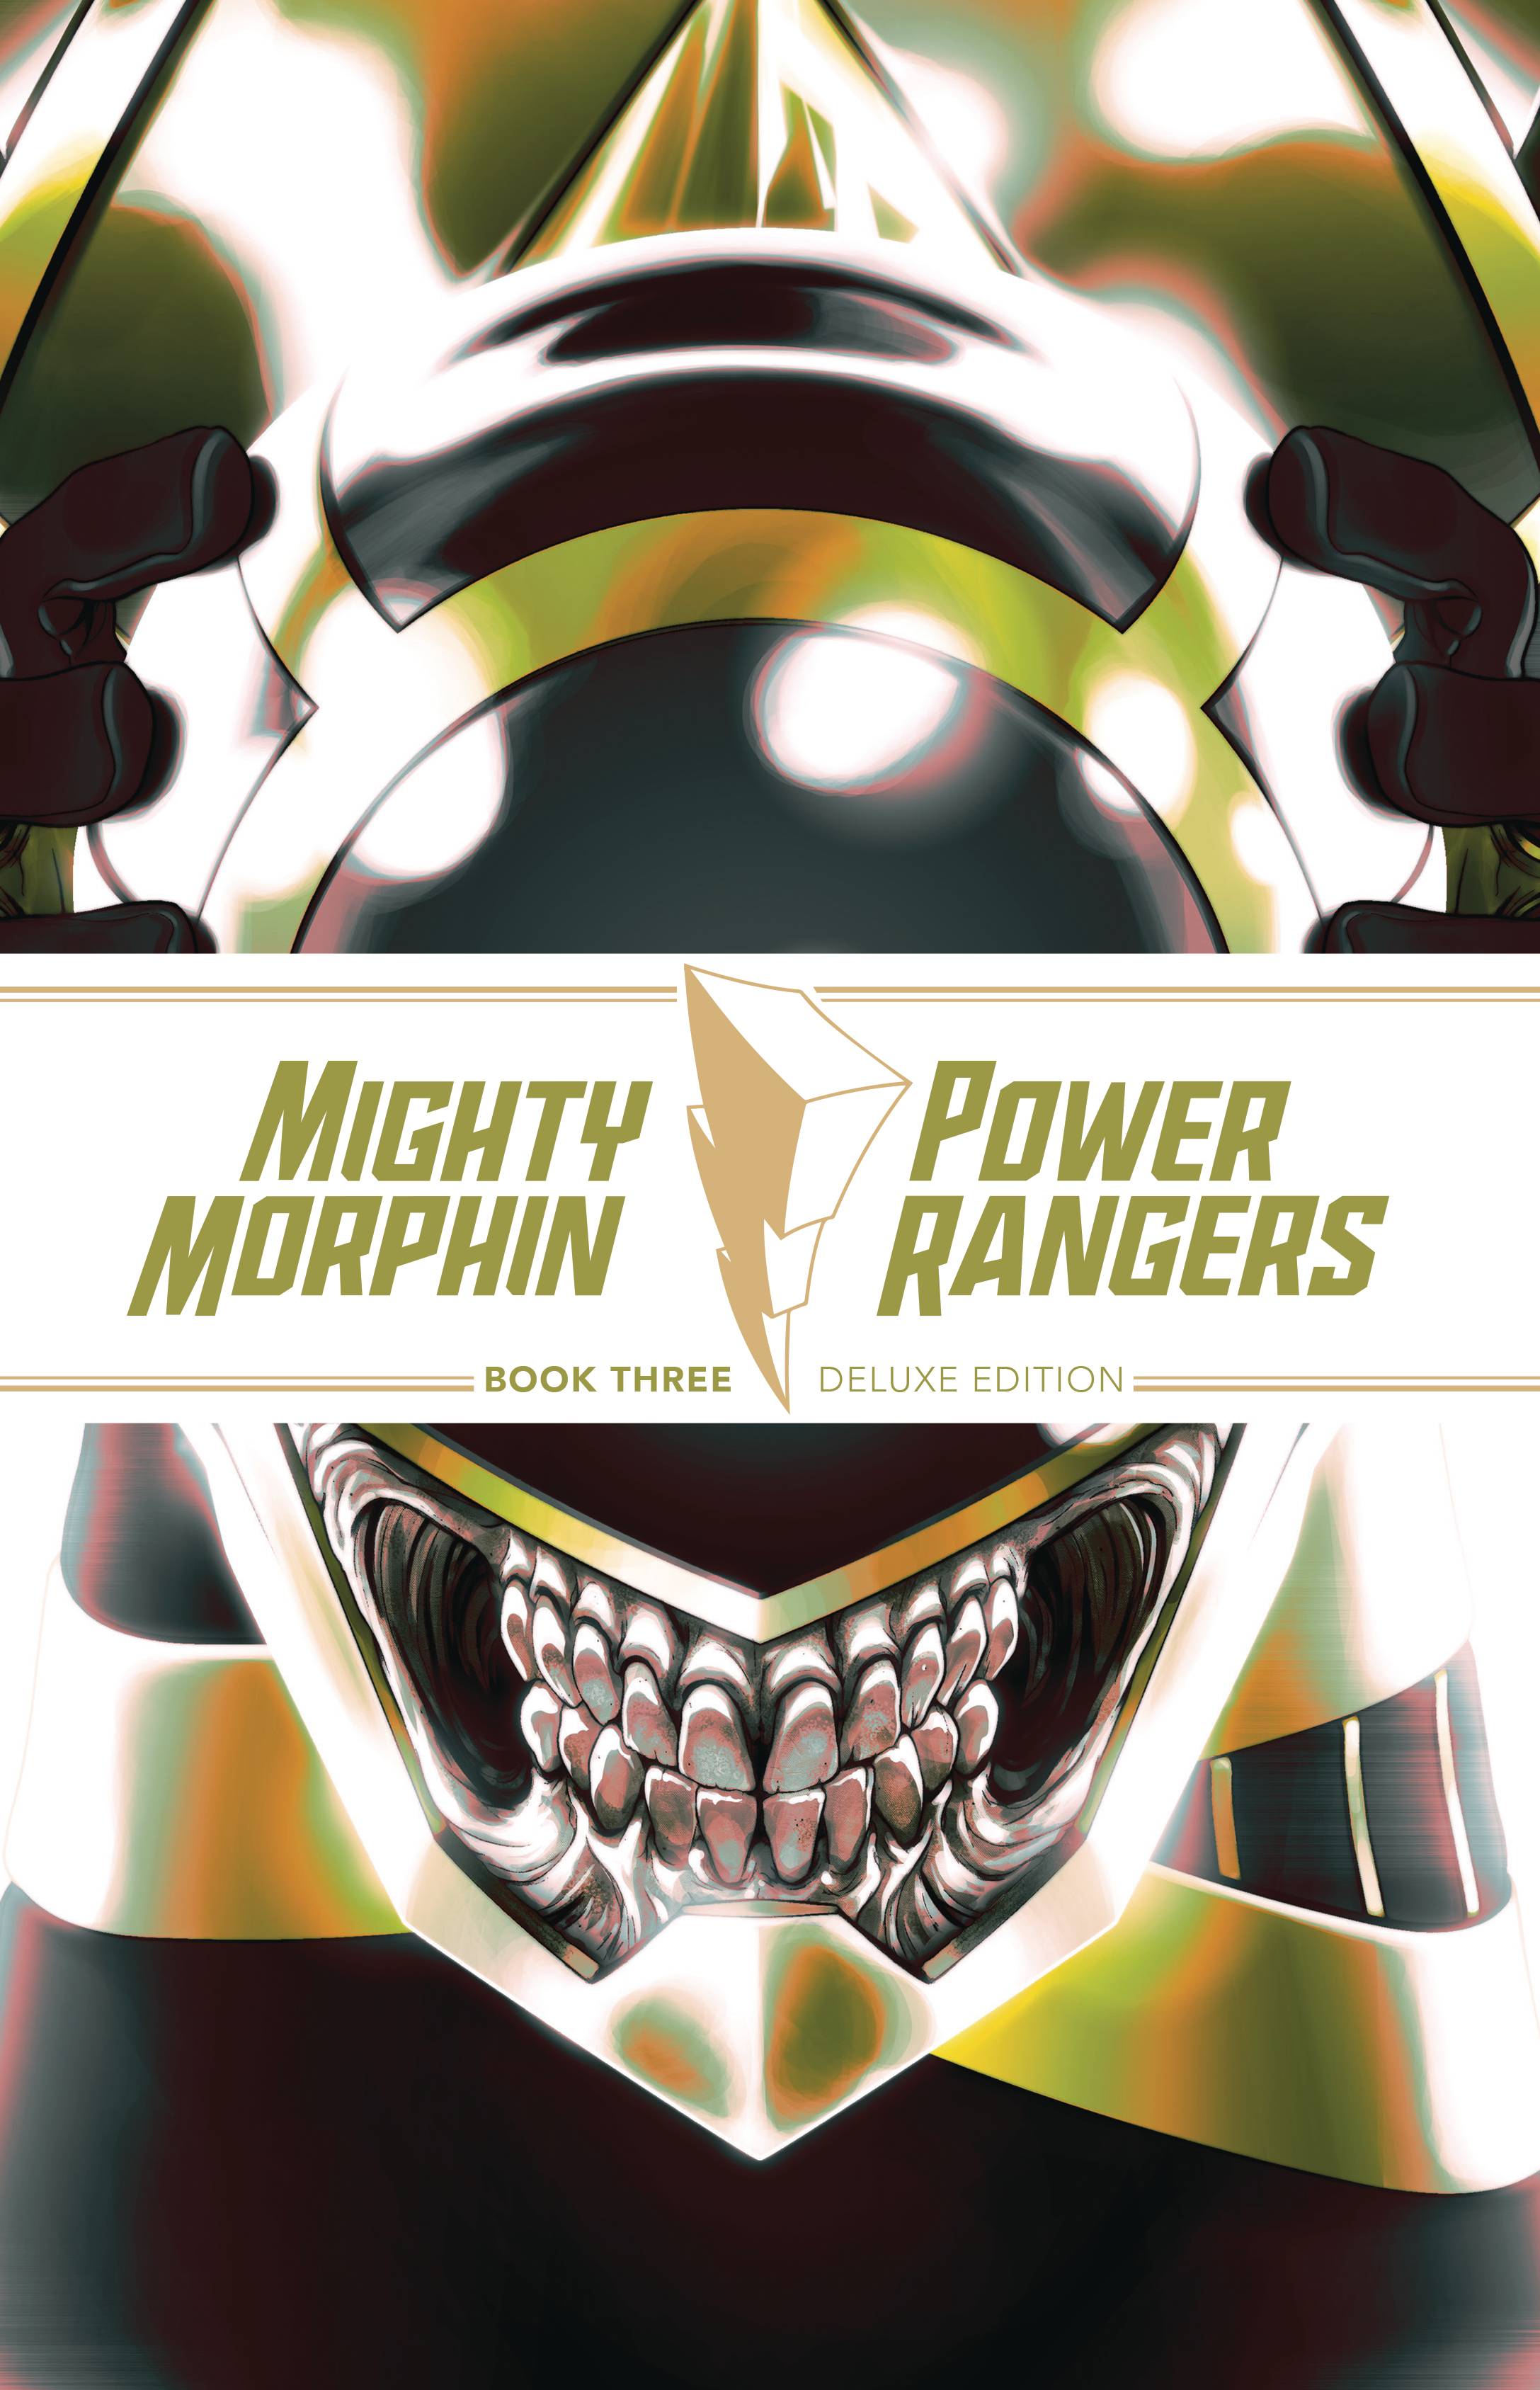 Mighty Morphin Power Rangers Delux Edition HC Book 03 *PRE-ORDER*